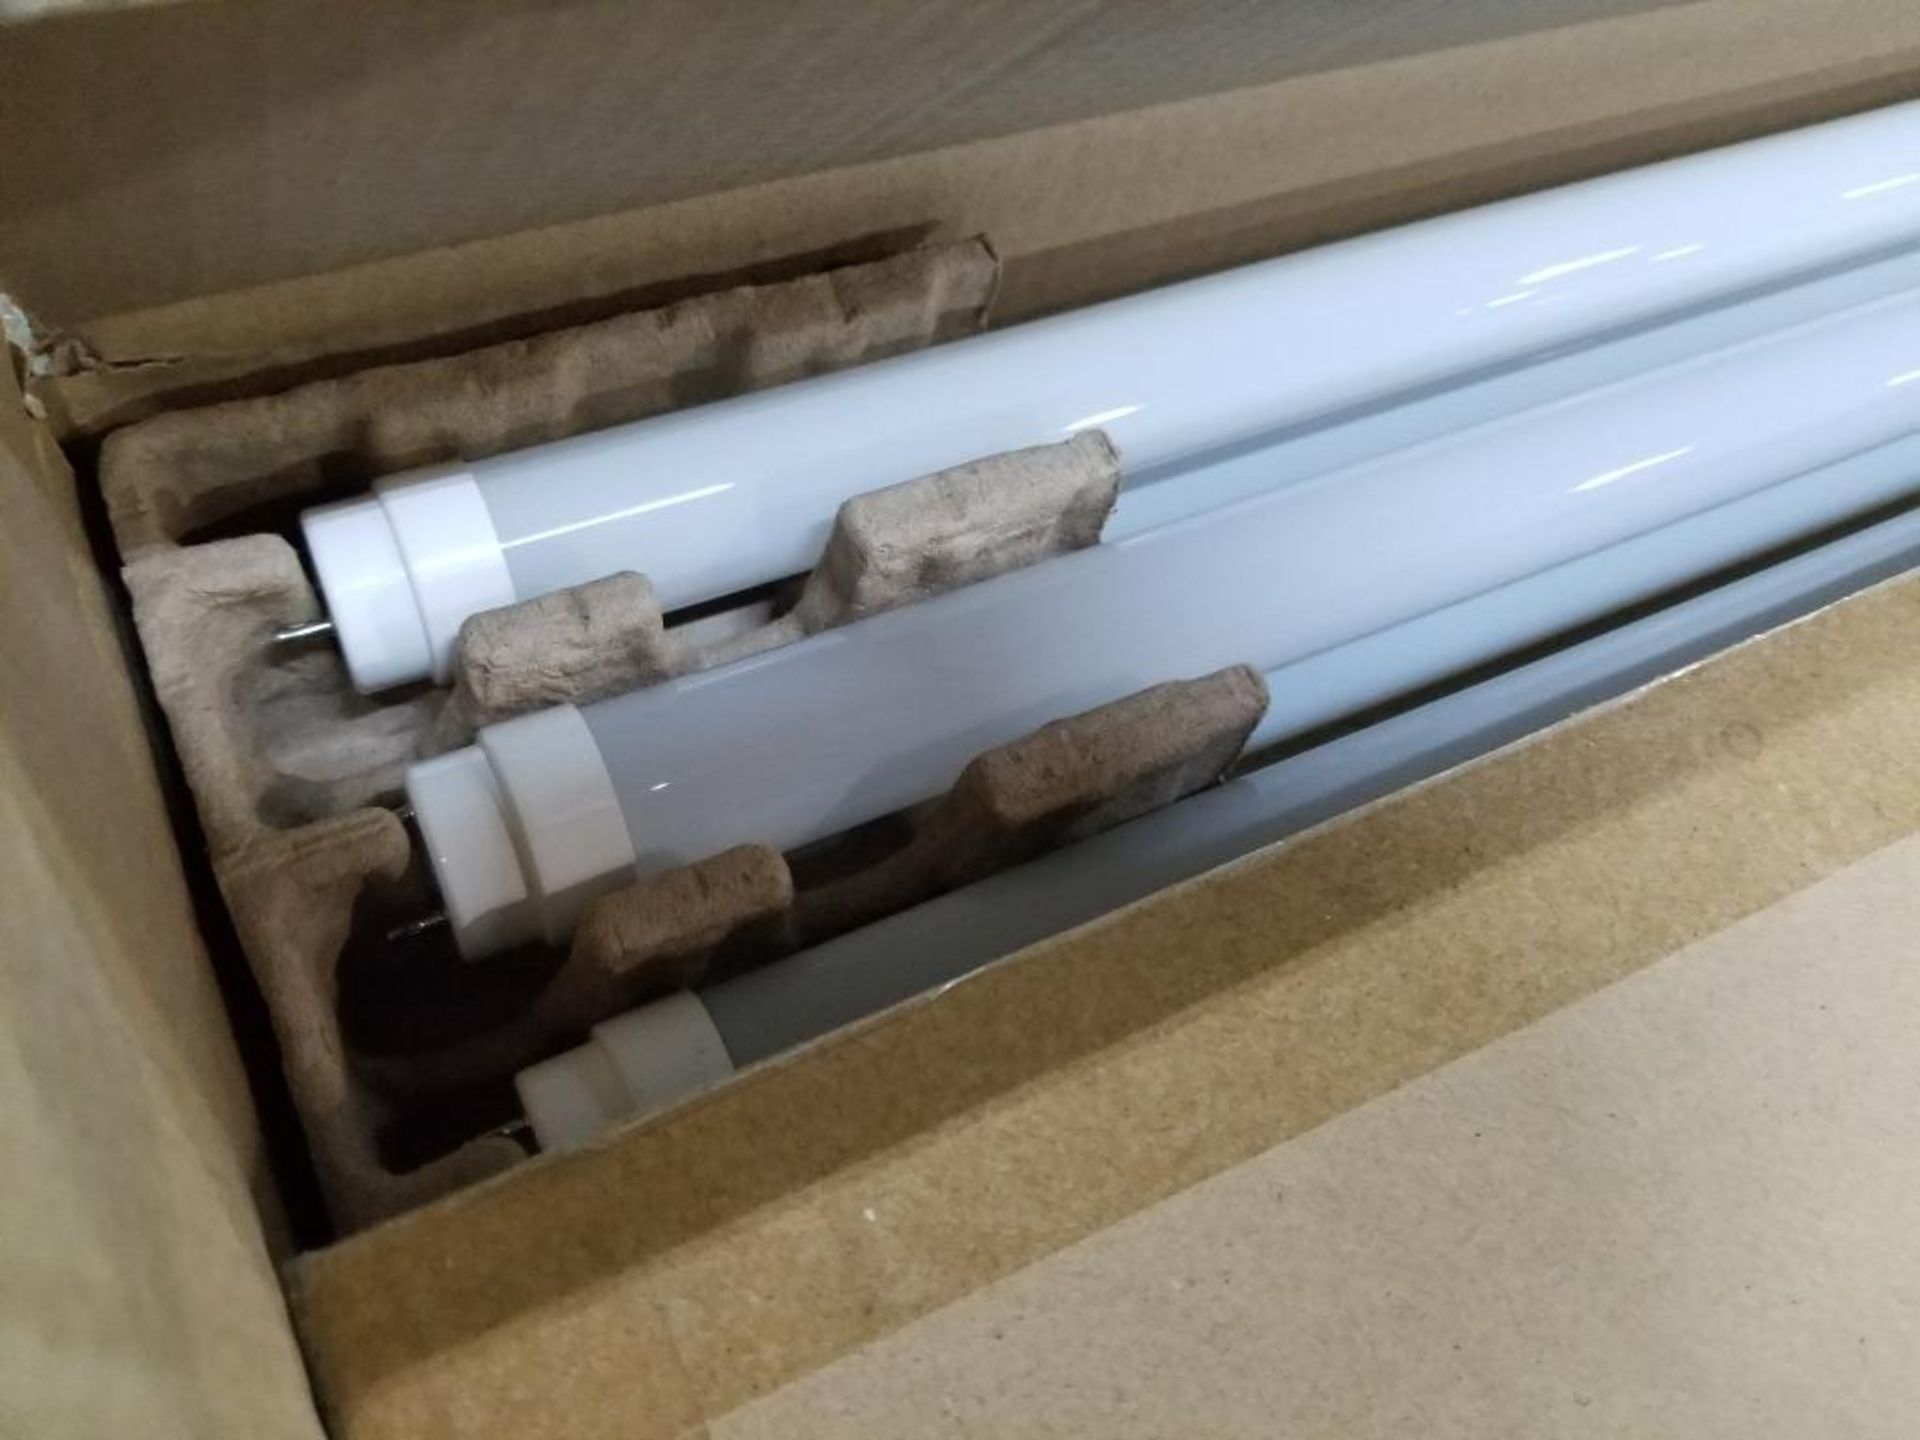 Qty 2 - Boxes of 10 each GE LED T8 replacement bulbs. - Image 4 of 5